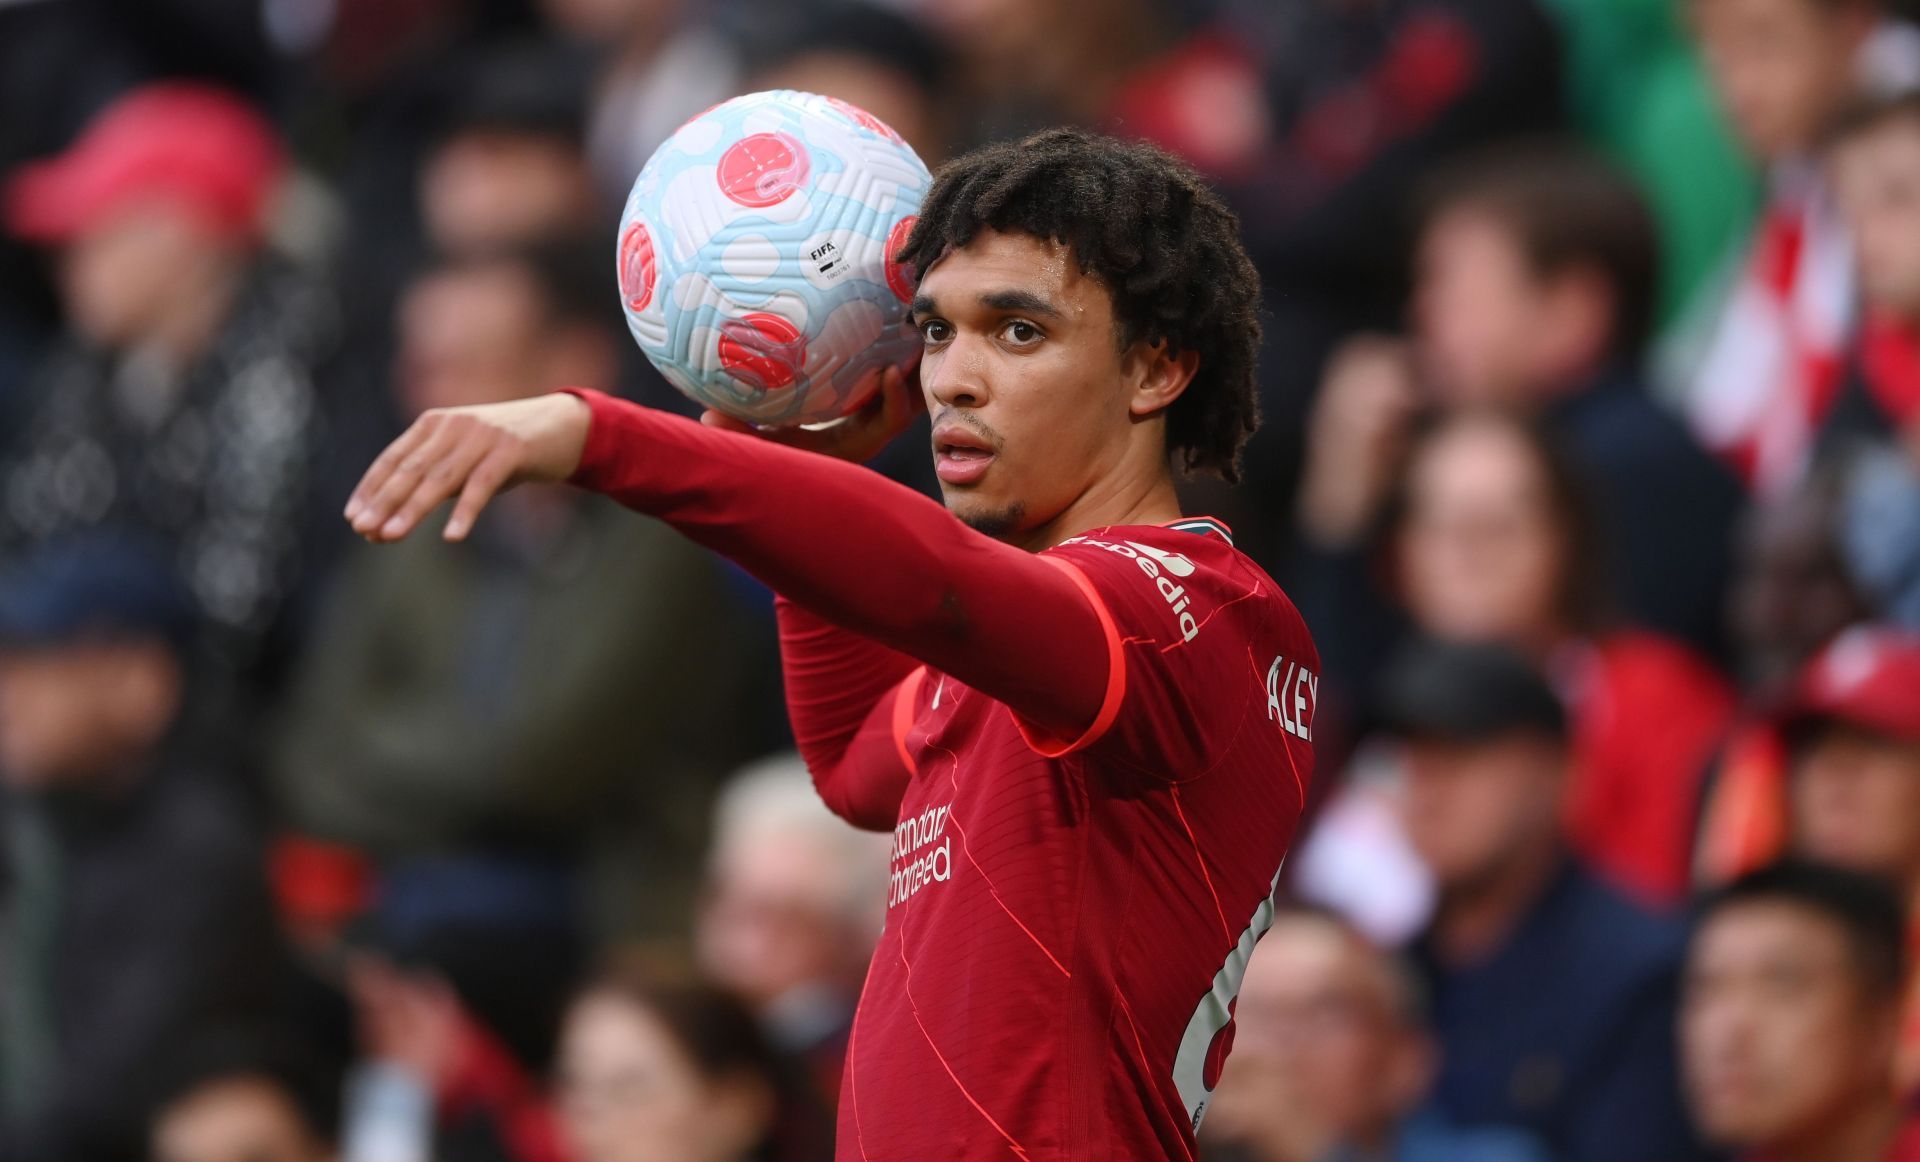 Trent Alexander-Arnold has been very productive in attack this season